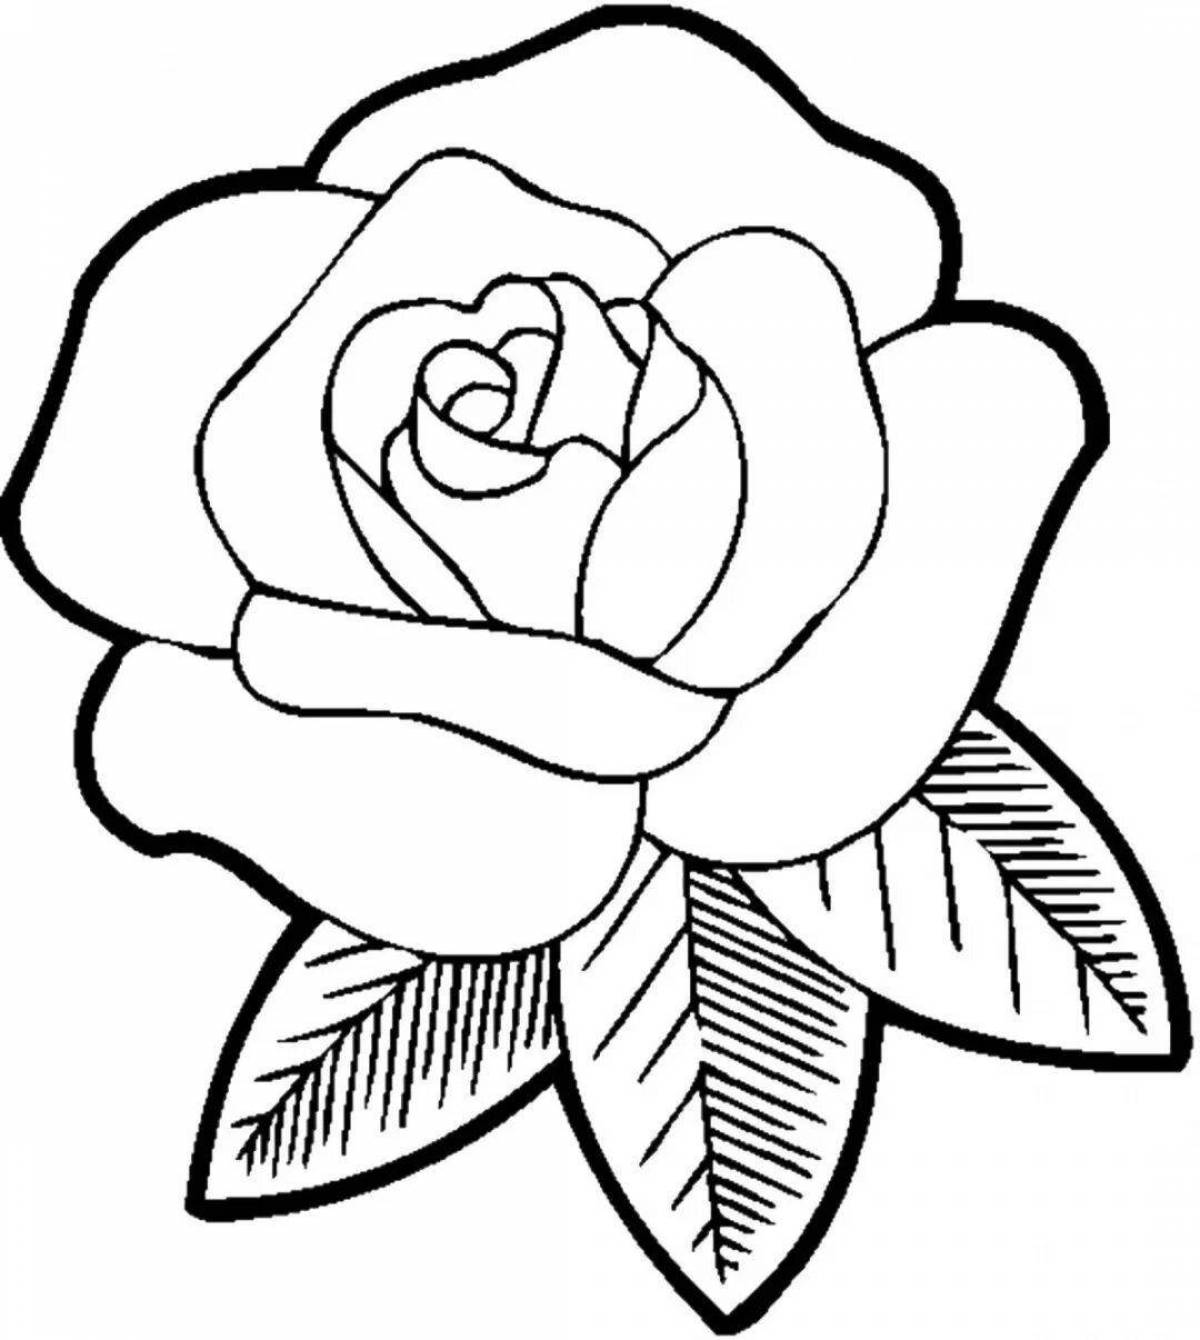 Great coloring pages to draw